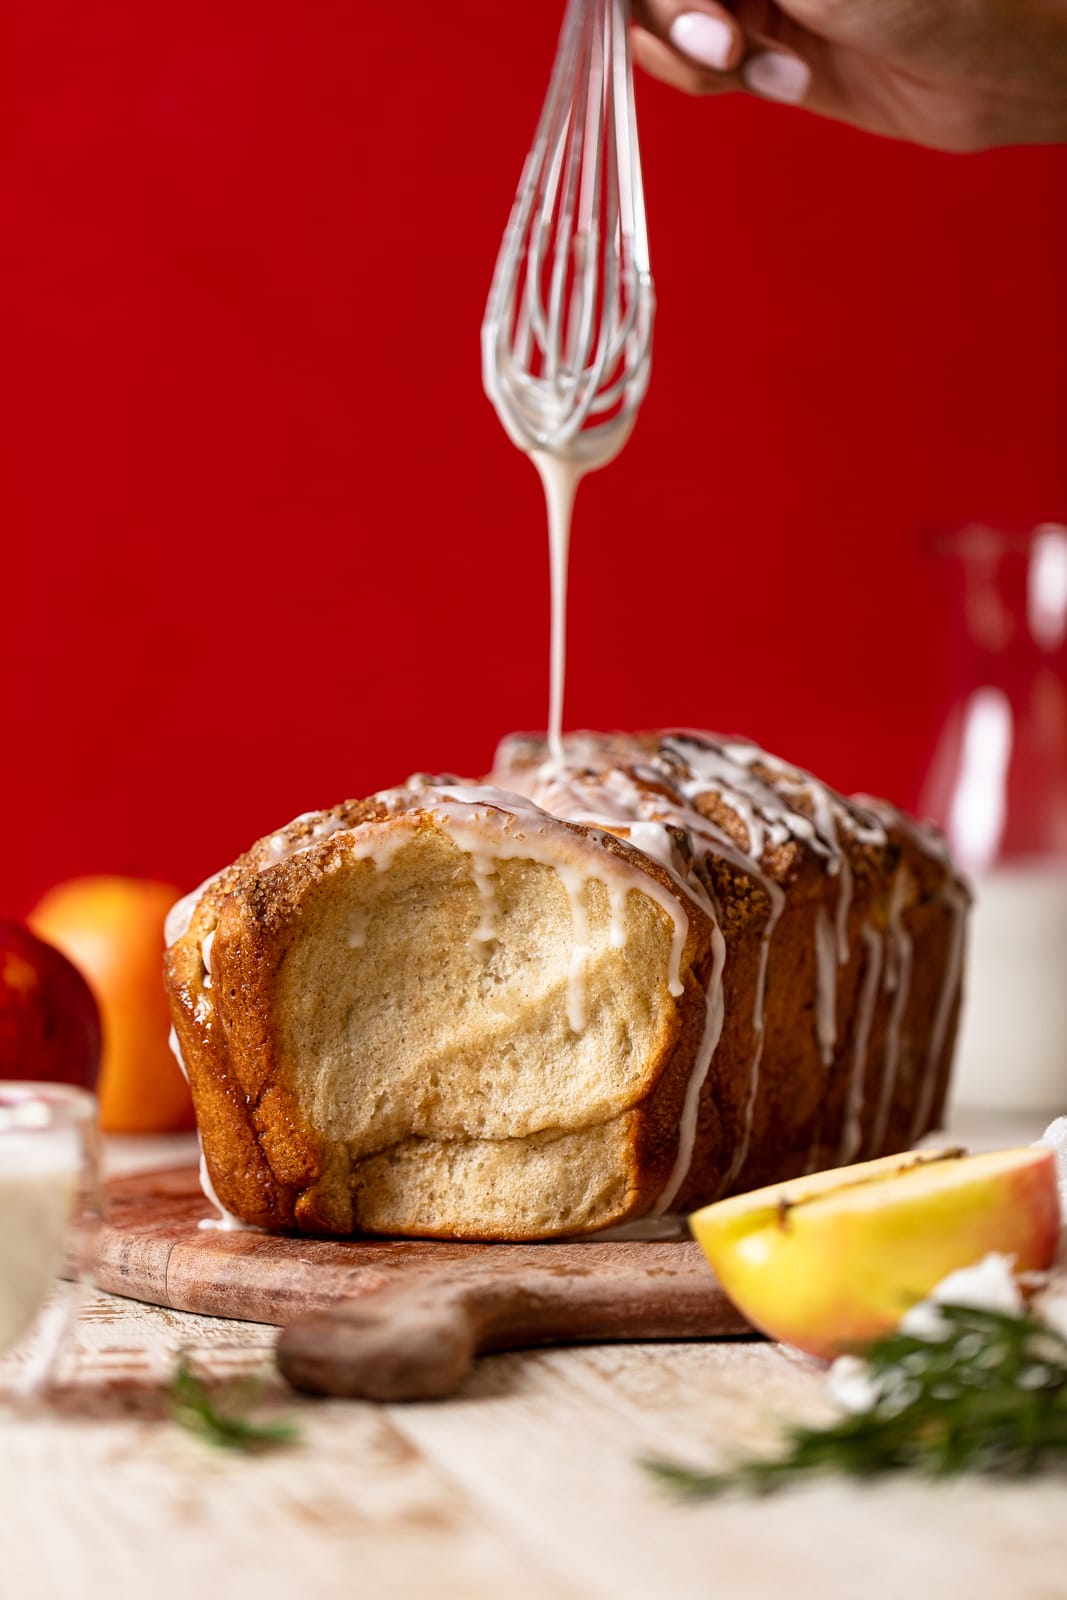 Whisk dripping glaze on a loaf of Vegan Apple Cinnamon Pull-Apart Bread